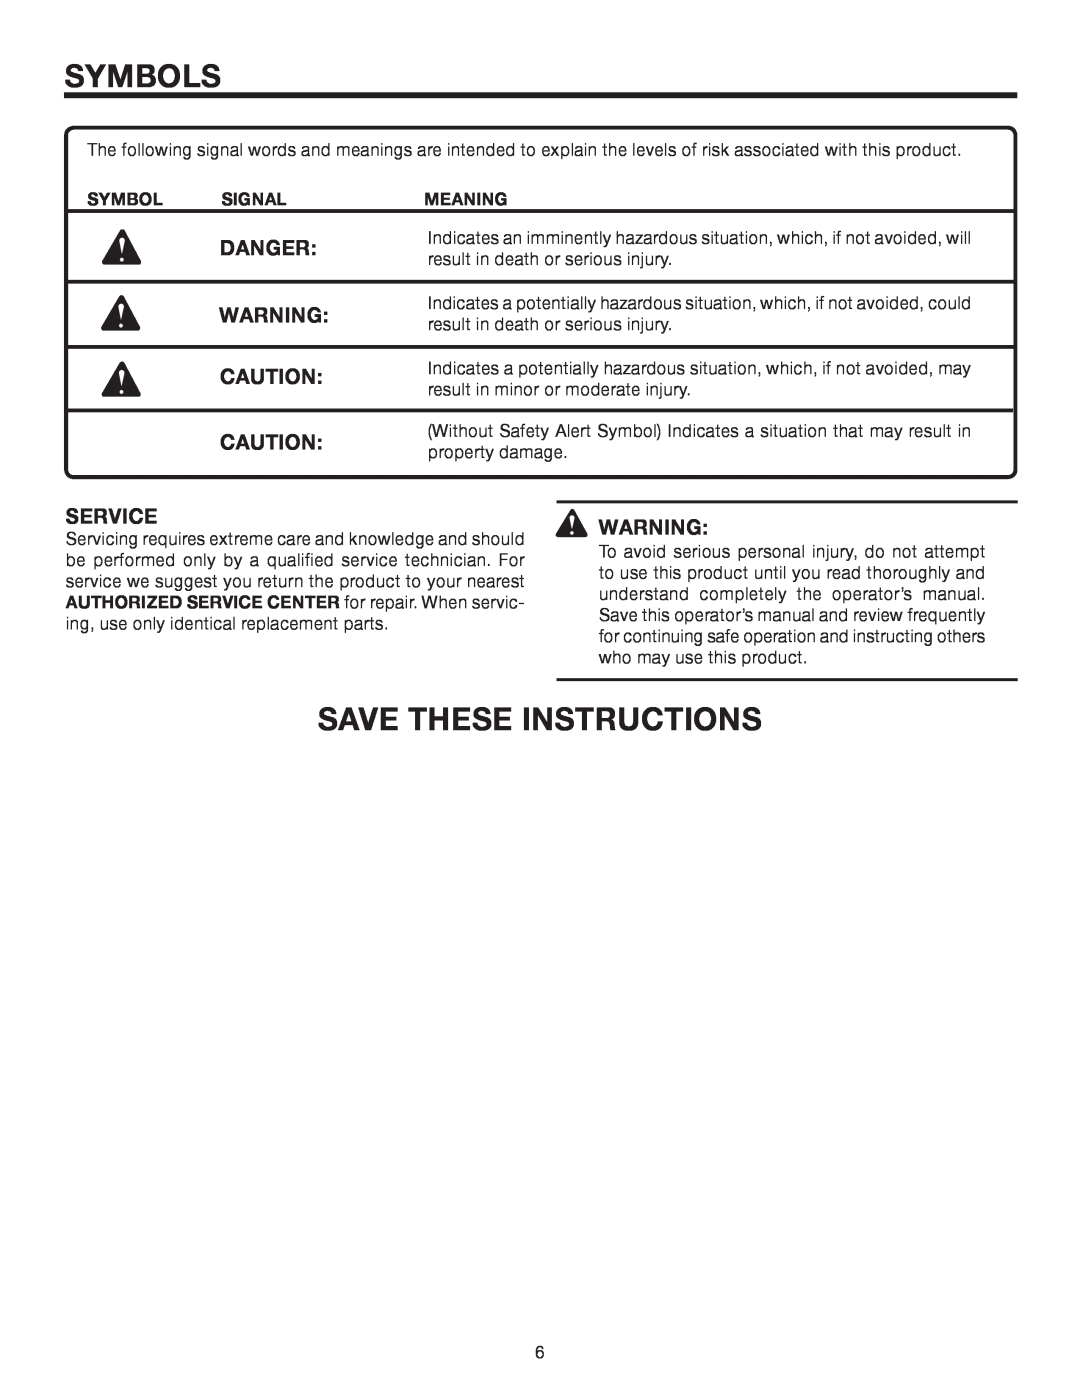 RIDGID R849 manual Save These Instructions, Danger, Symbols, Service, Signal, Meaning 